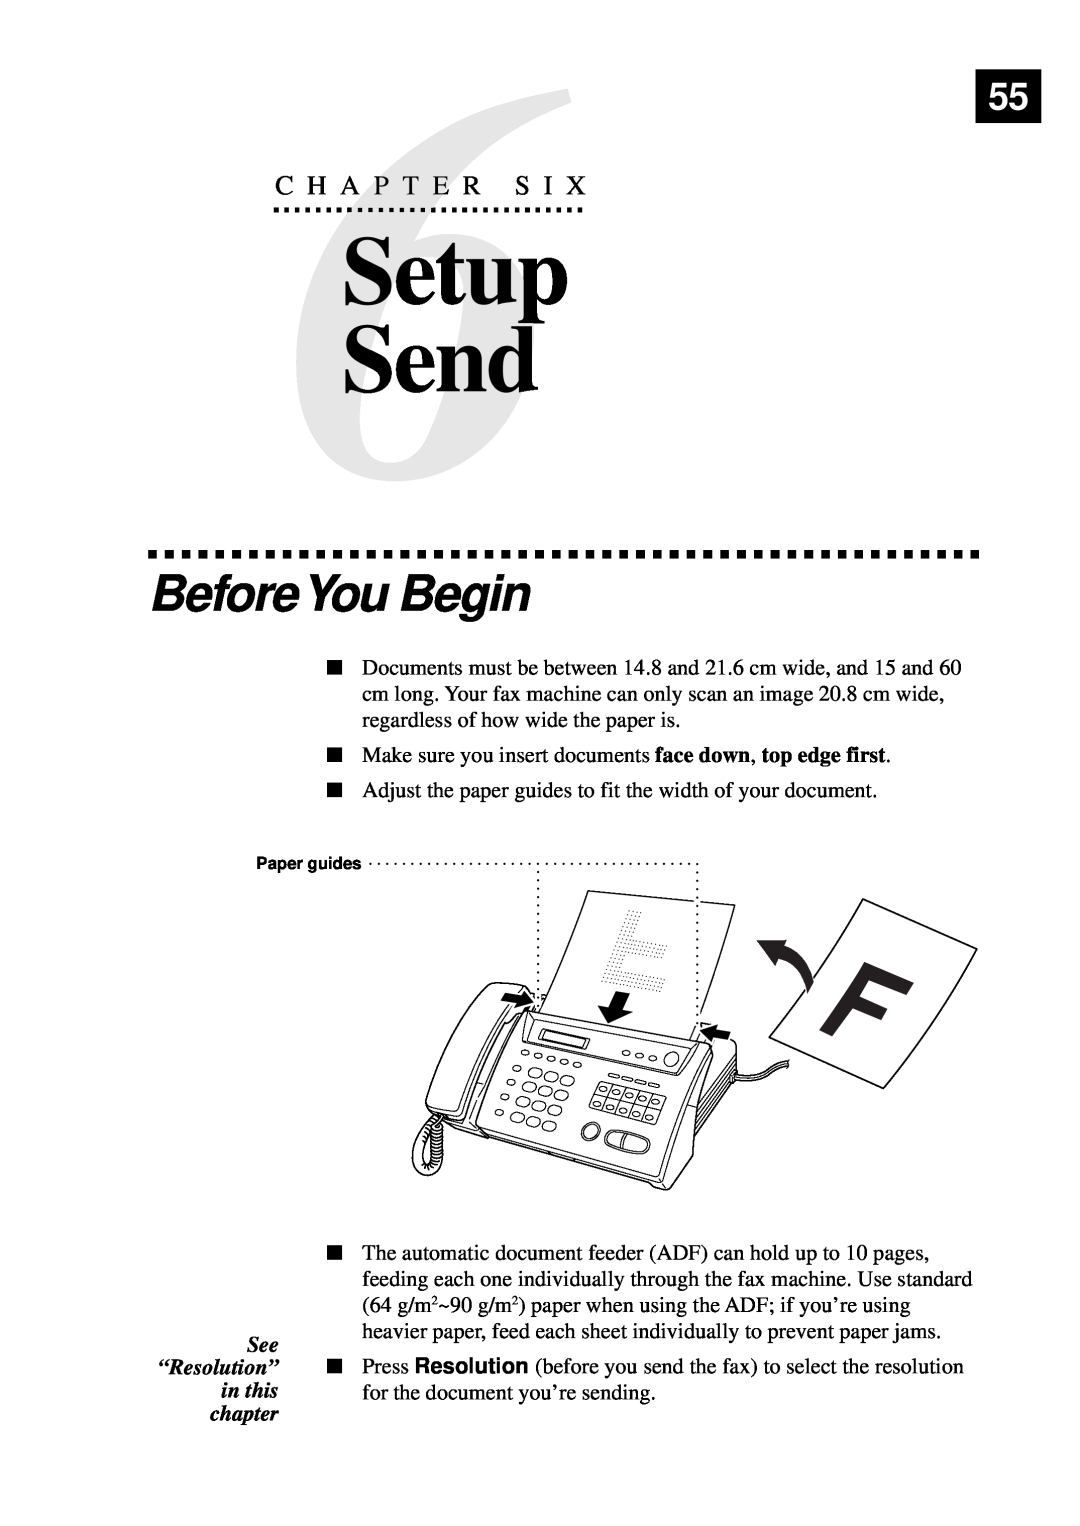 Brother 515 manual Setup Send, BeforeYou Begin, C6H A P T E R S I, See “Resolution” in this chapter 